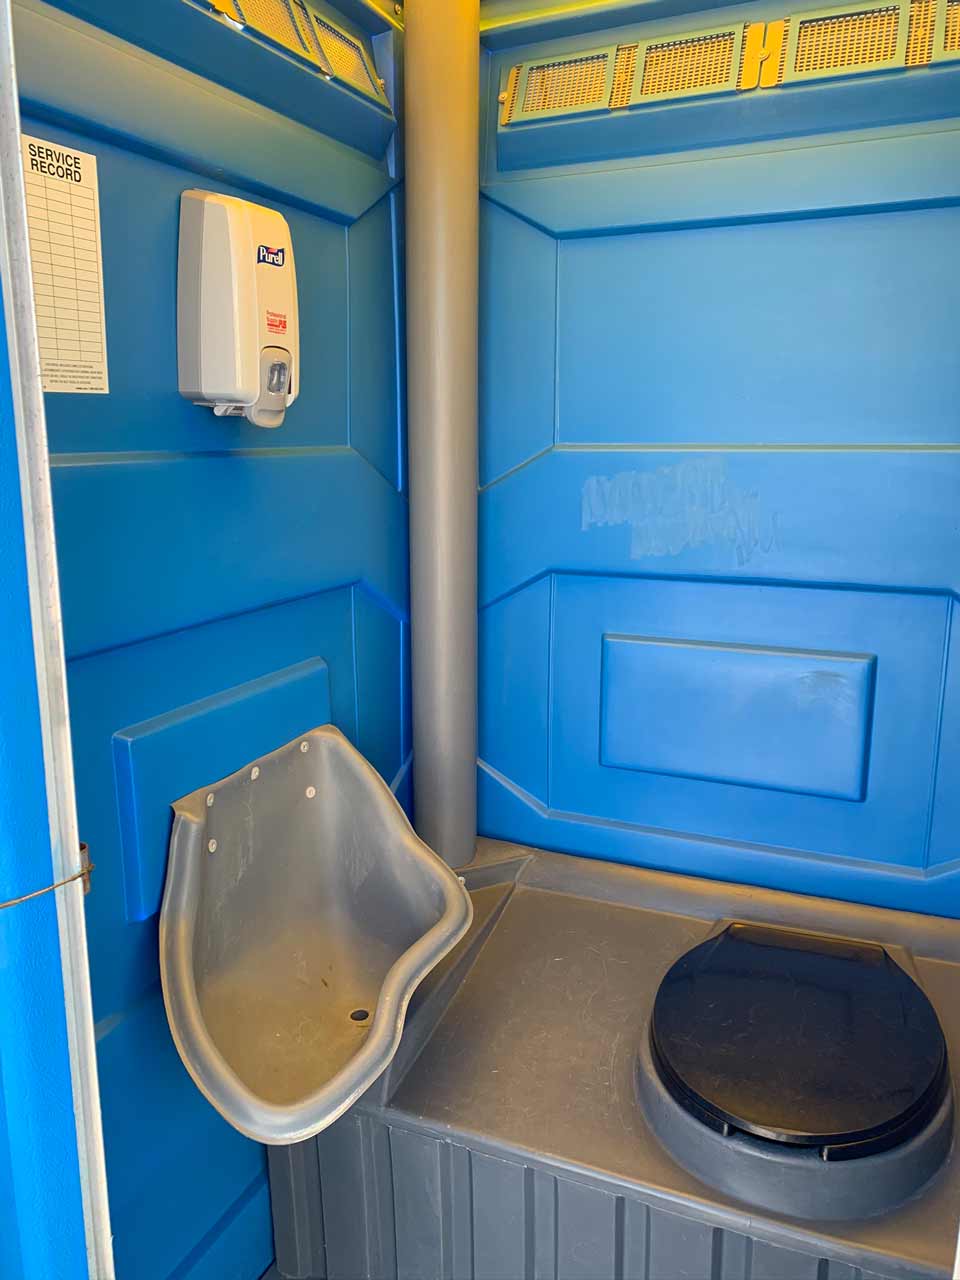 The inside of our Basic Portable Restroom.